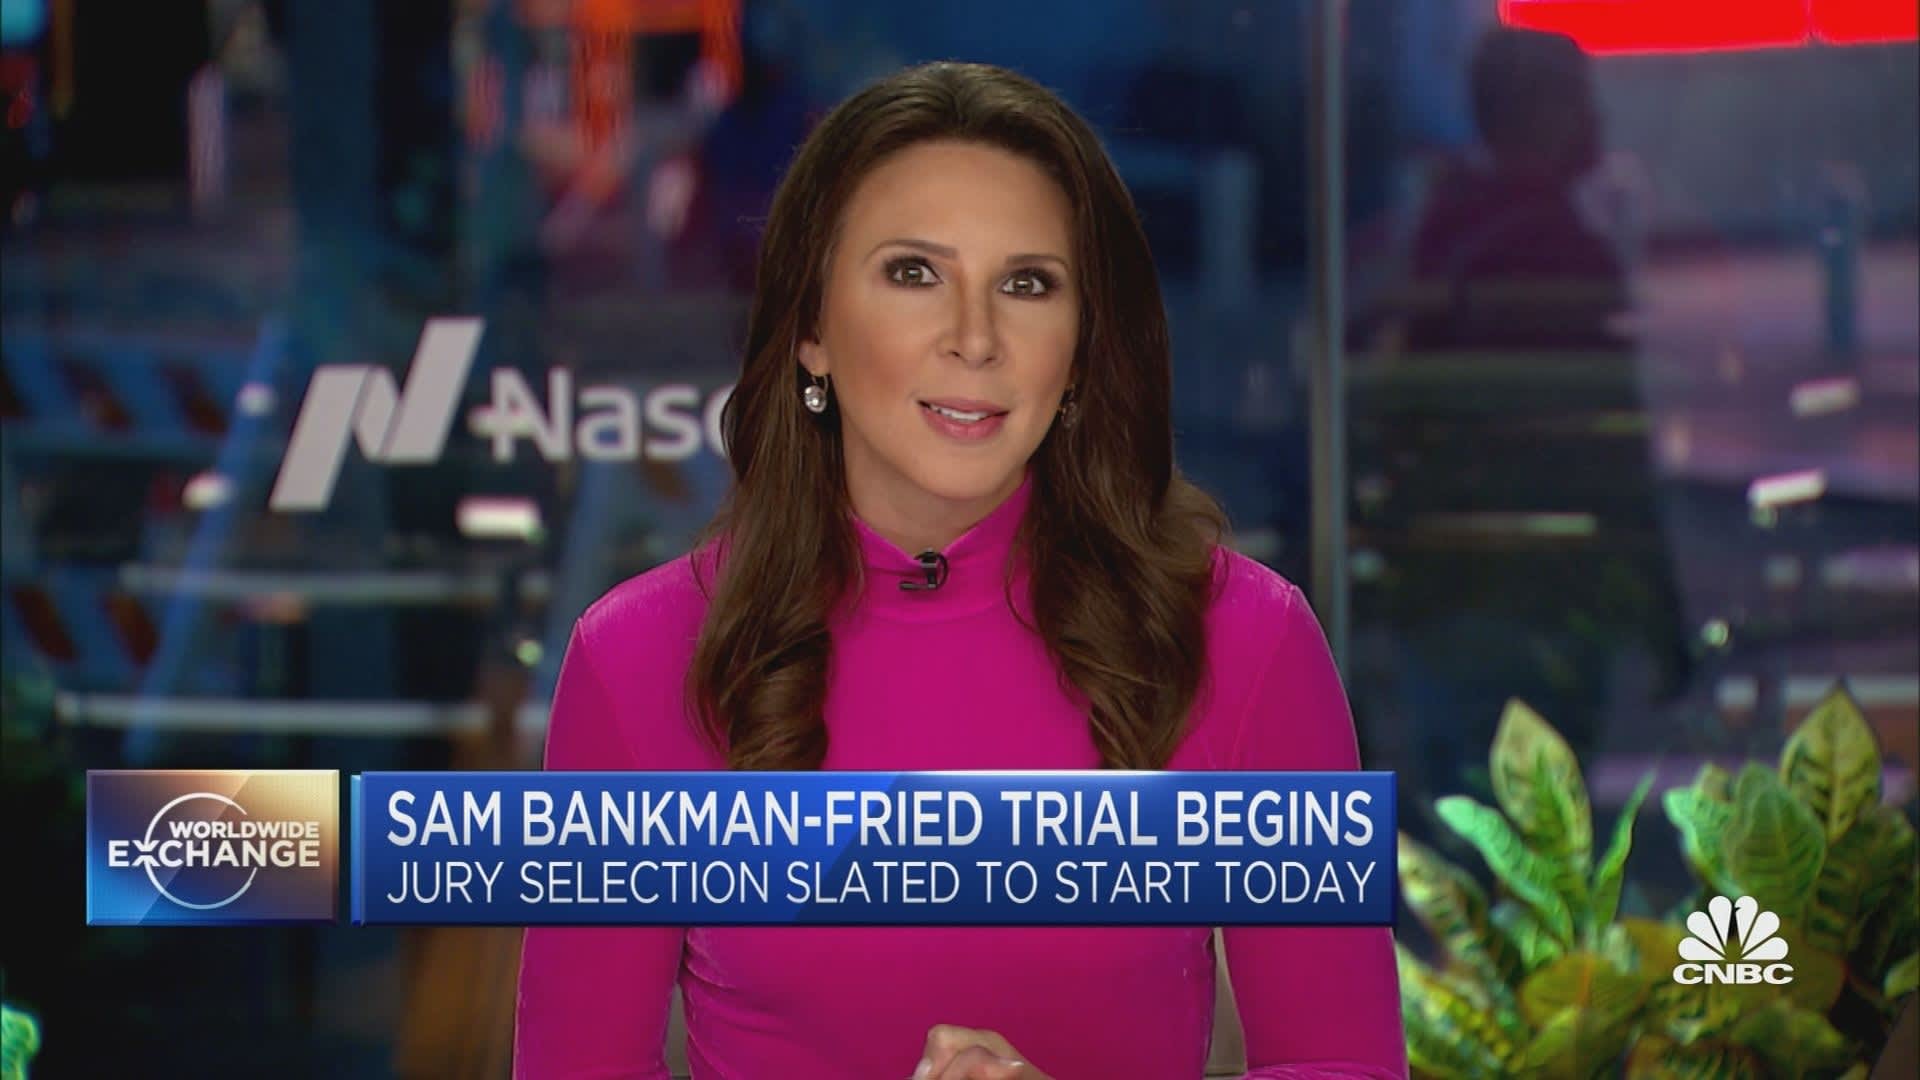 The $8 billion Sam Bankman-Fried criminal trial starts today — here's what's at stake and how we got here